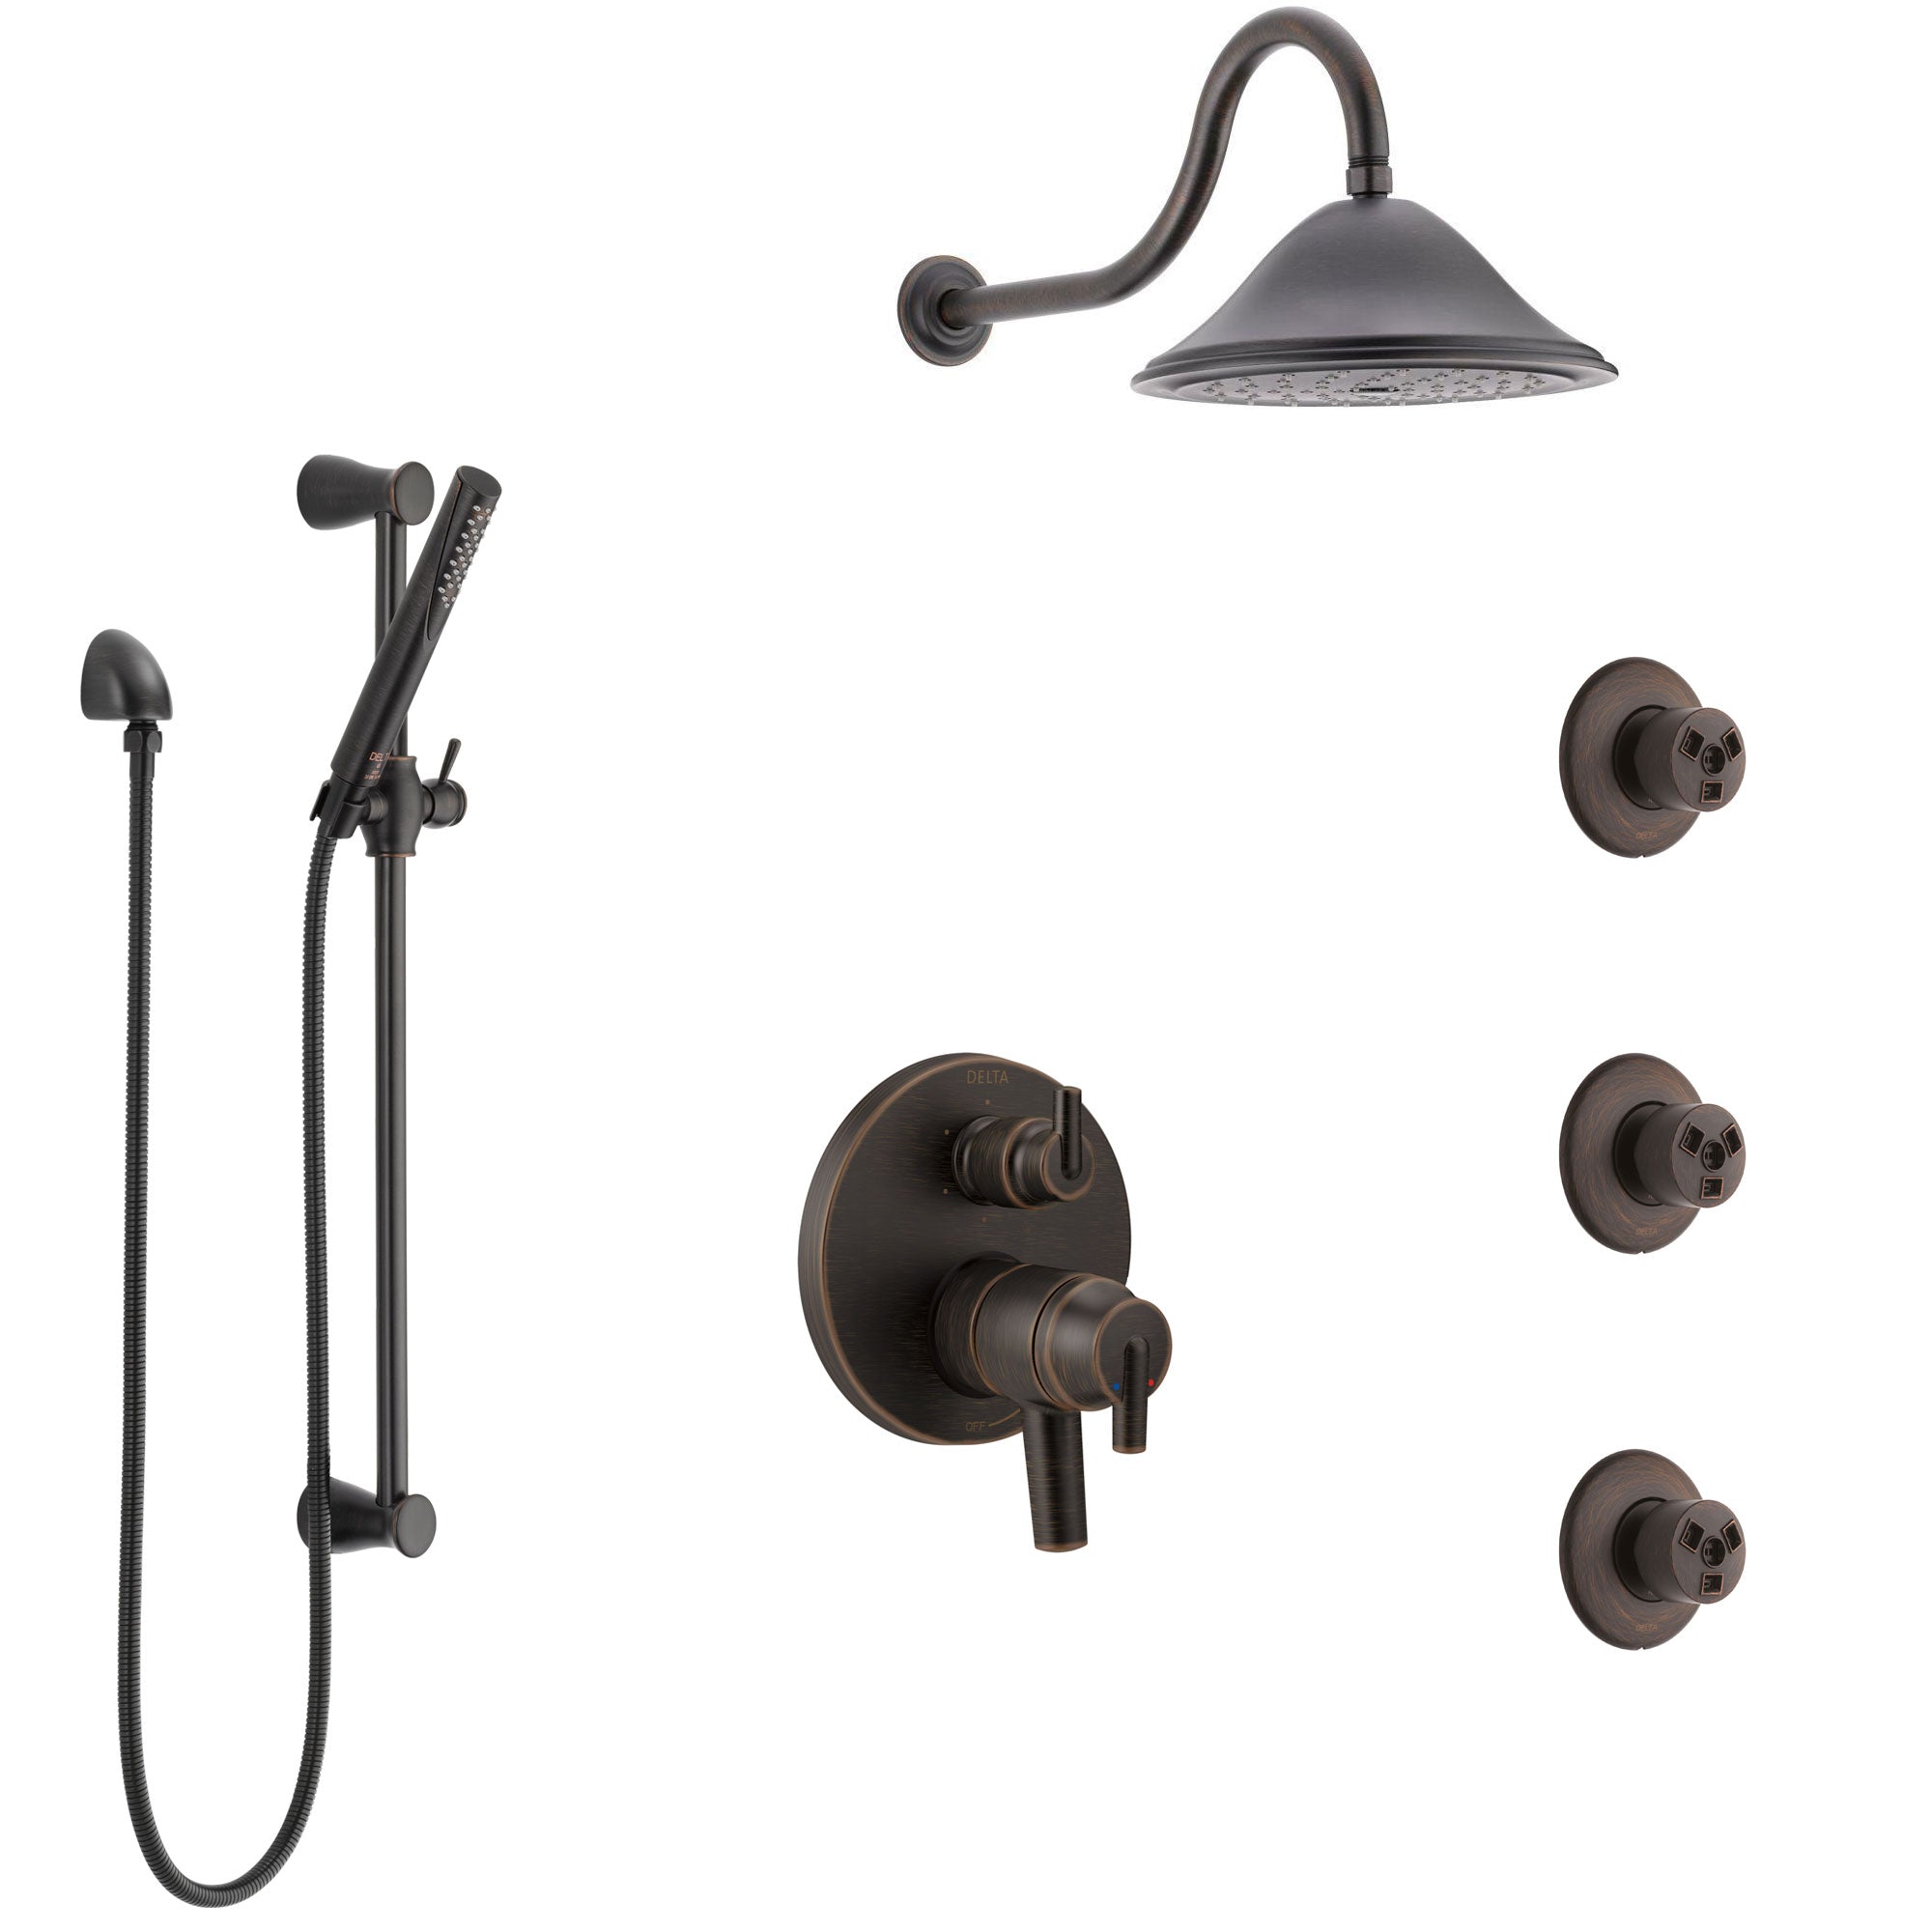 Delta Trinsic Venetian Bronze Shower System with Dual Control Handle, Integrated Diverter, Showerhead, 3 Body Sprays, and Hand Shower SS27959RB11